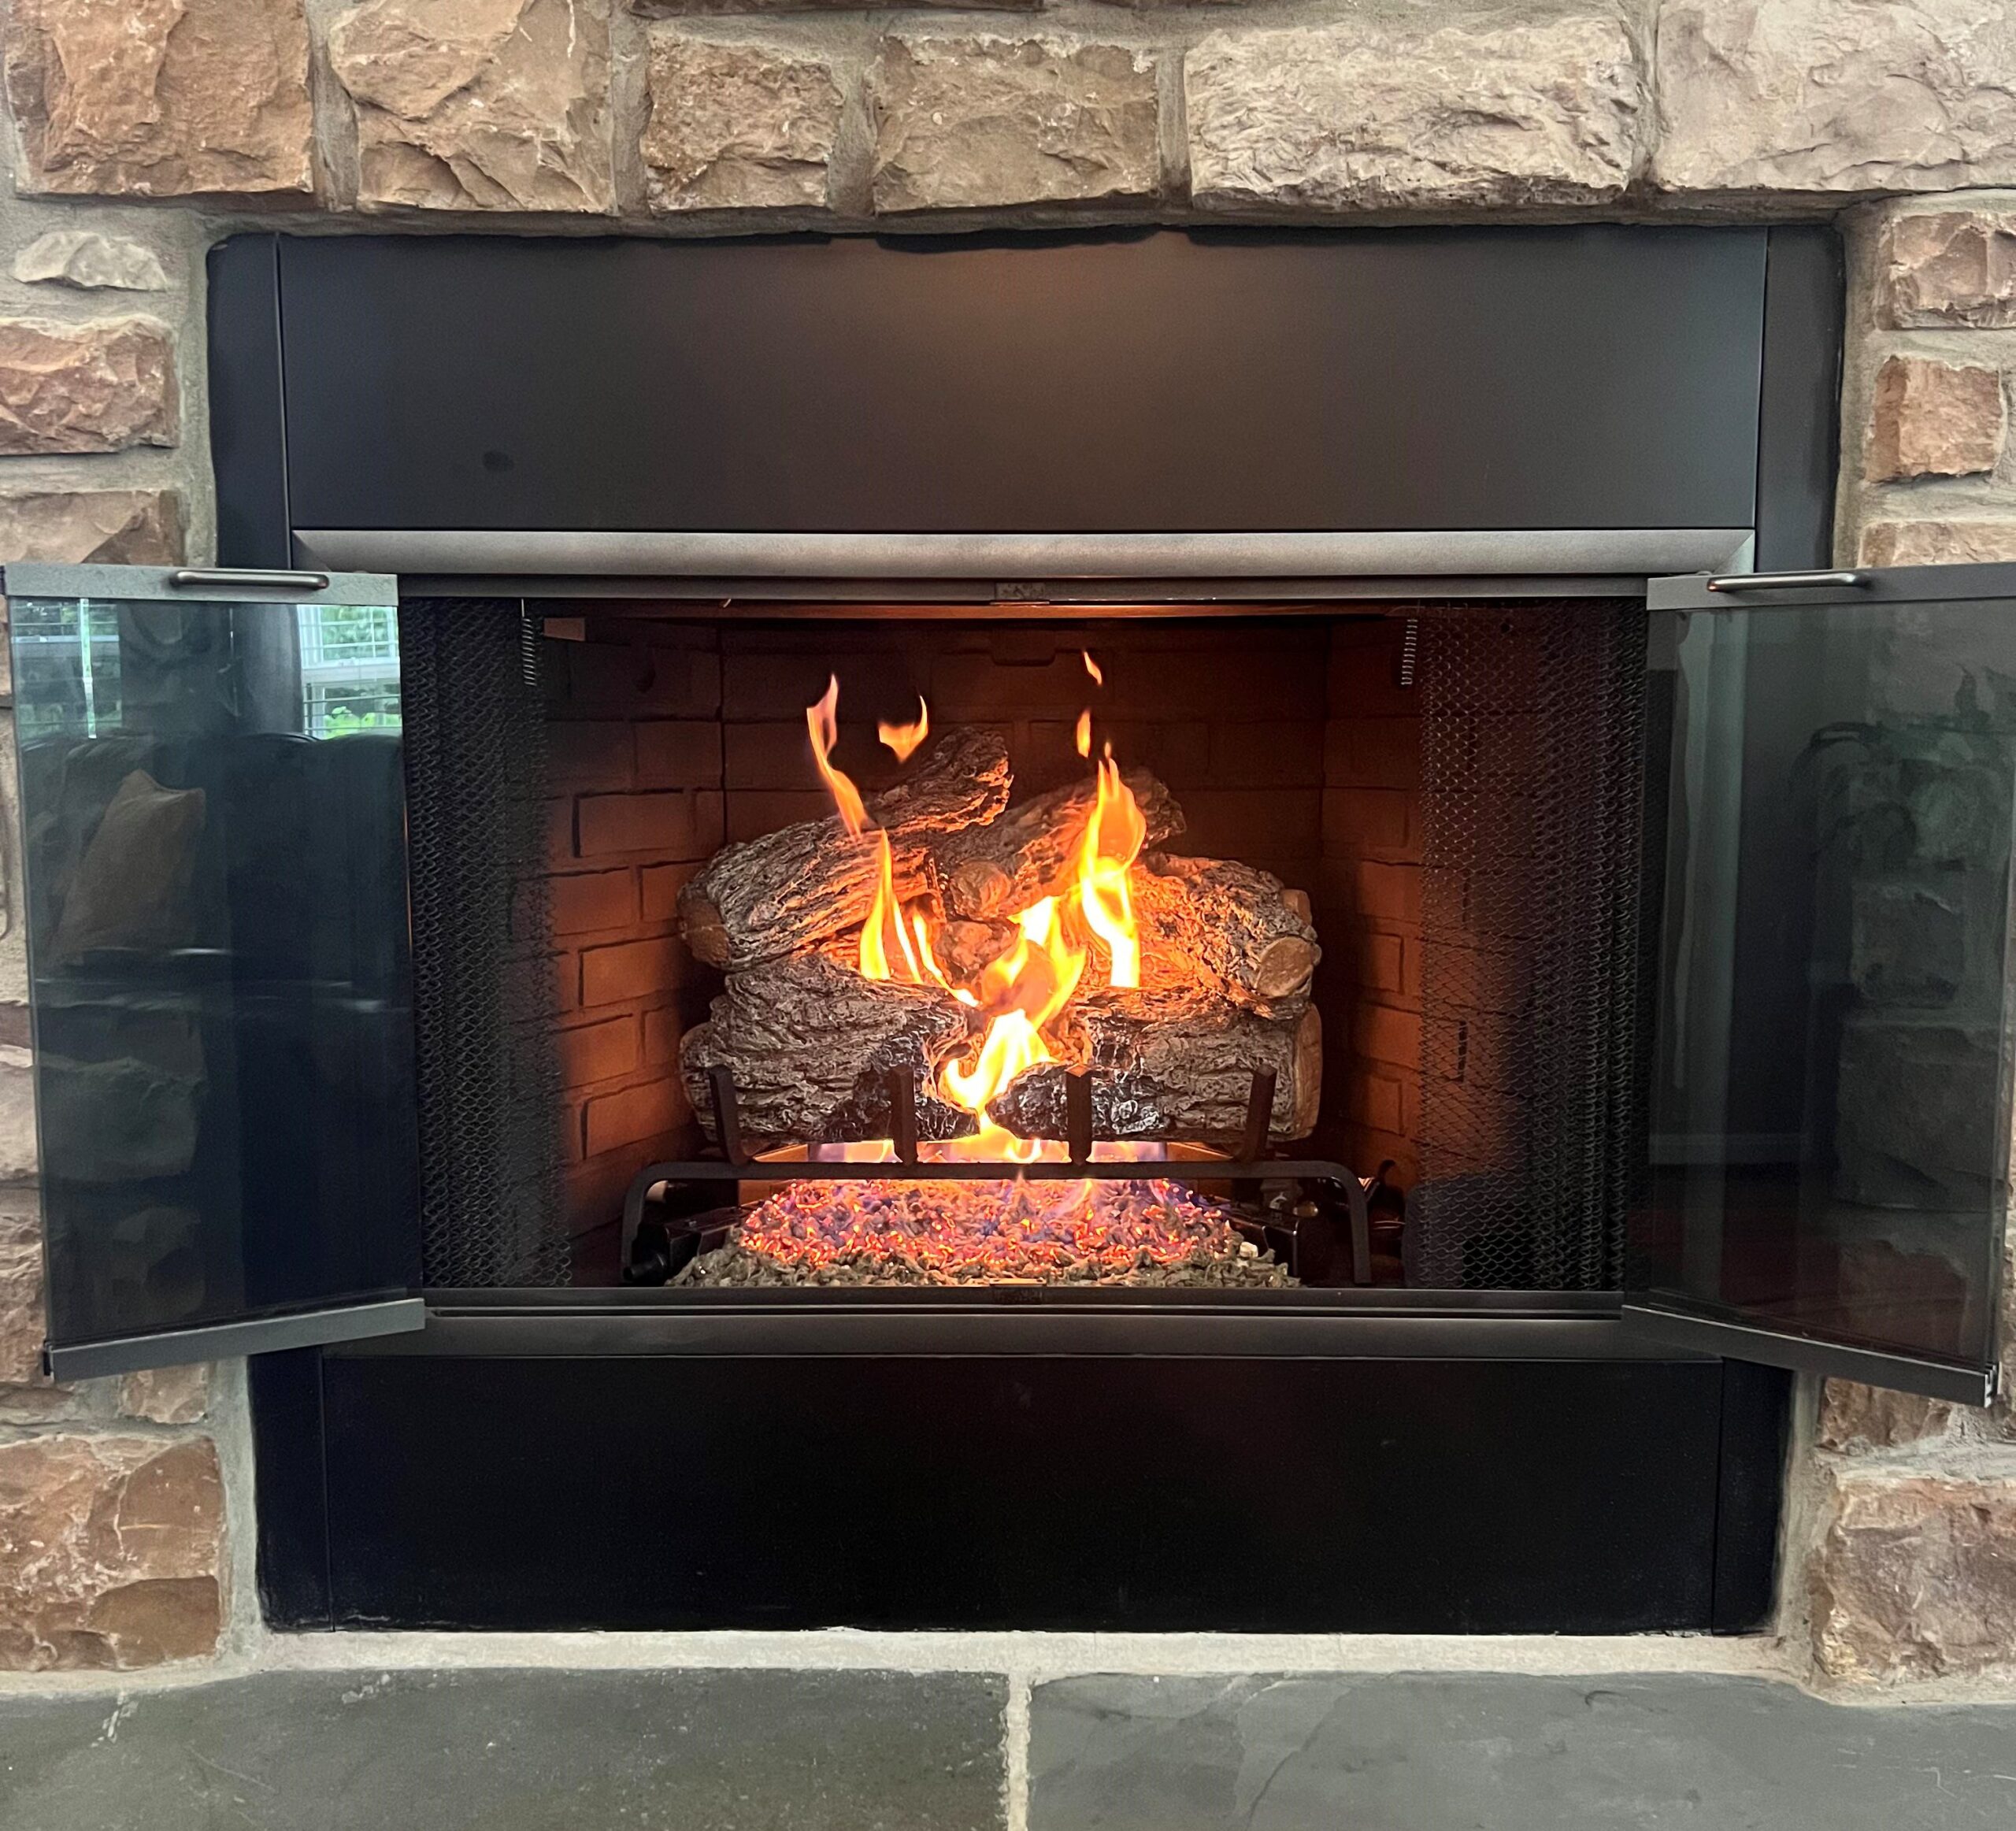 Gas Fireplace Insert in a wood fireplace